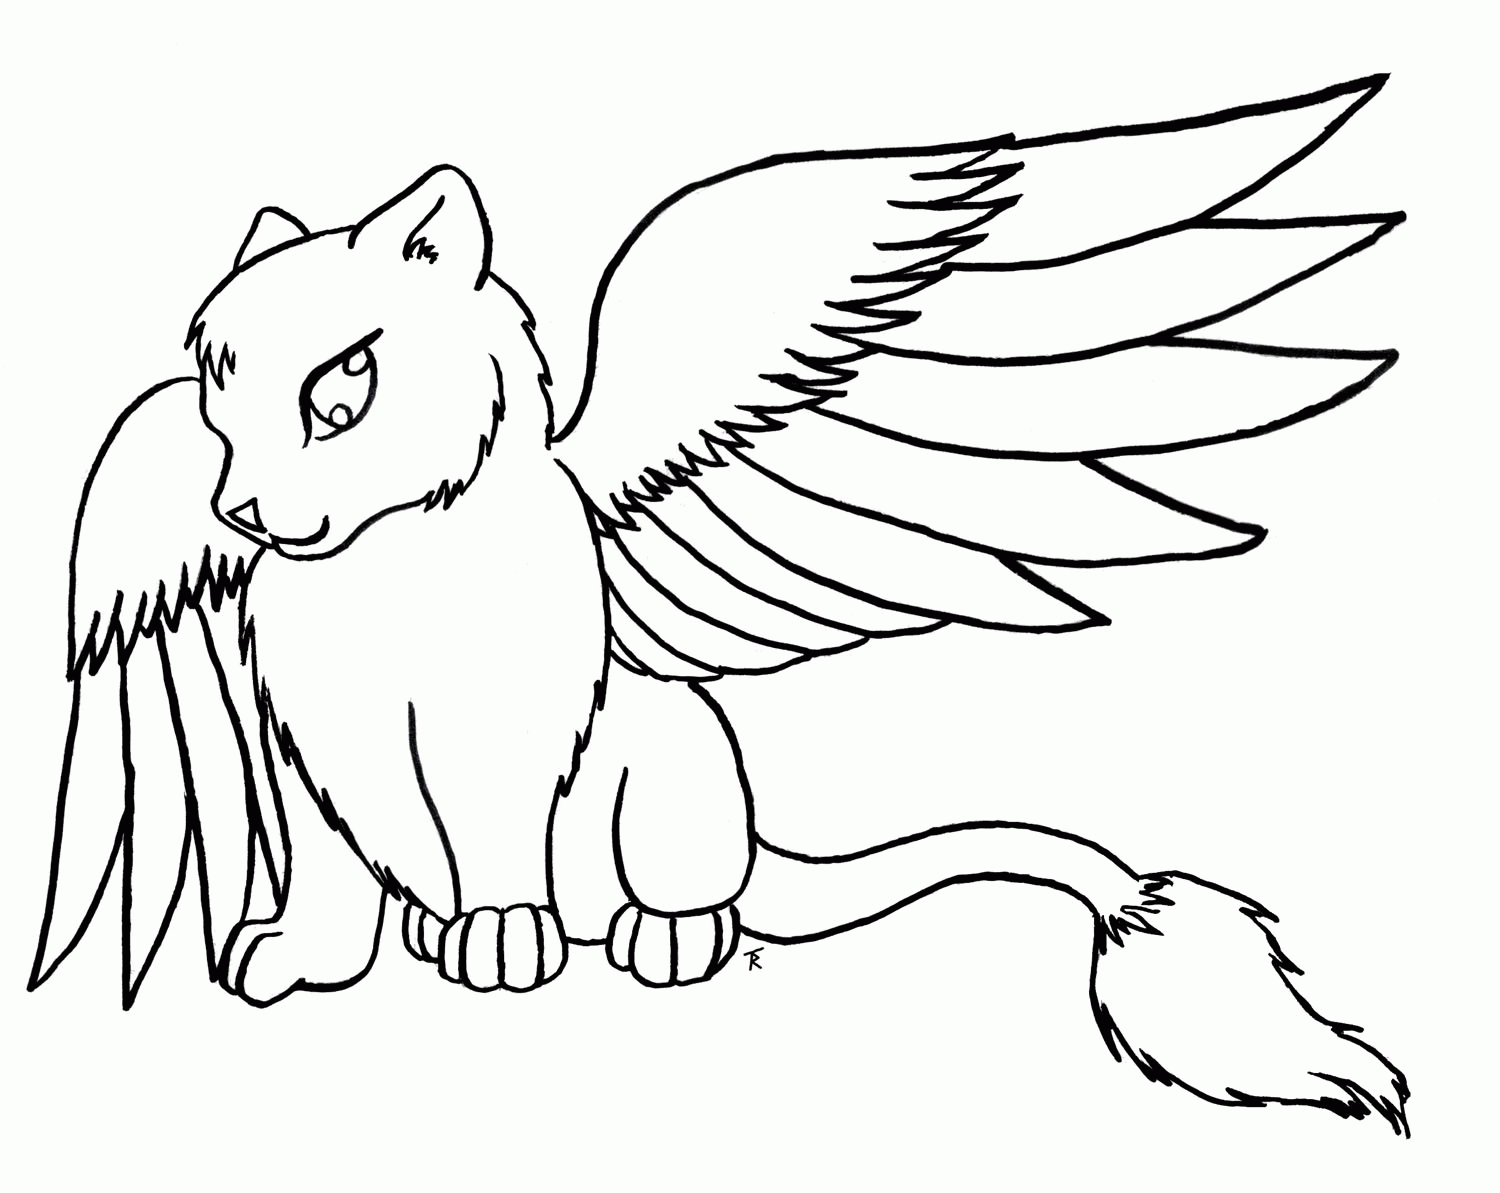 11 Pics of Cute Winged Wolf Coloring Pages - Wolves Coloring Pages ...